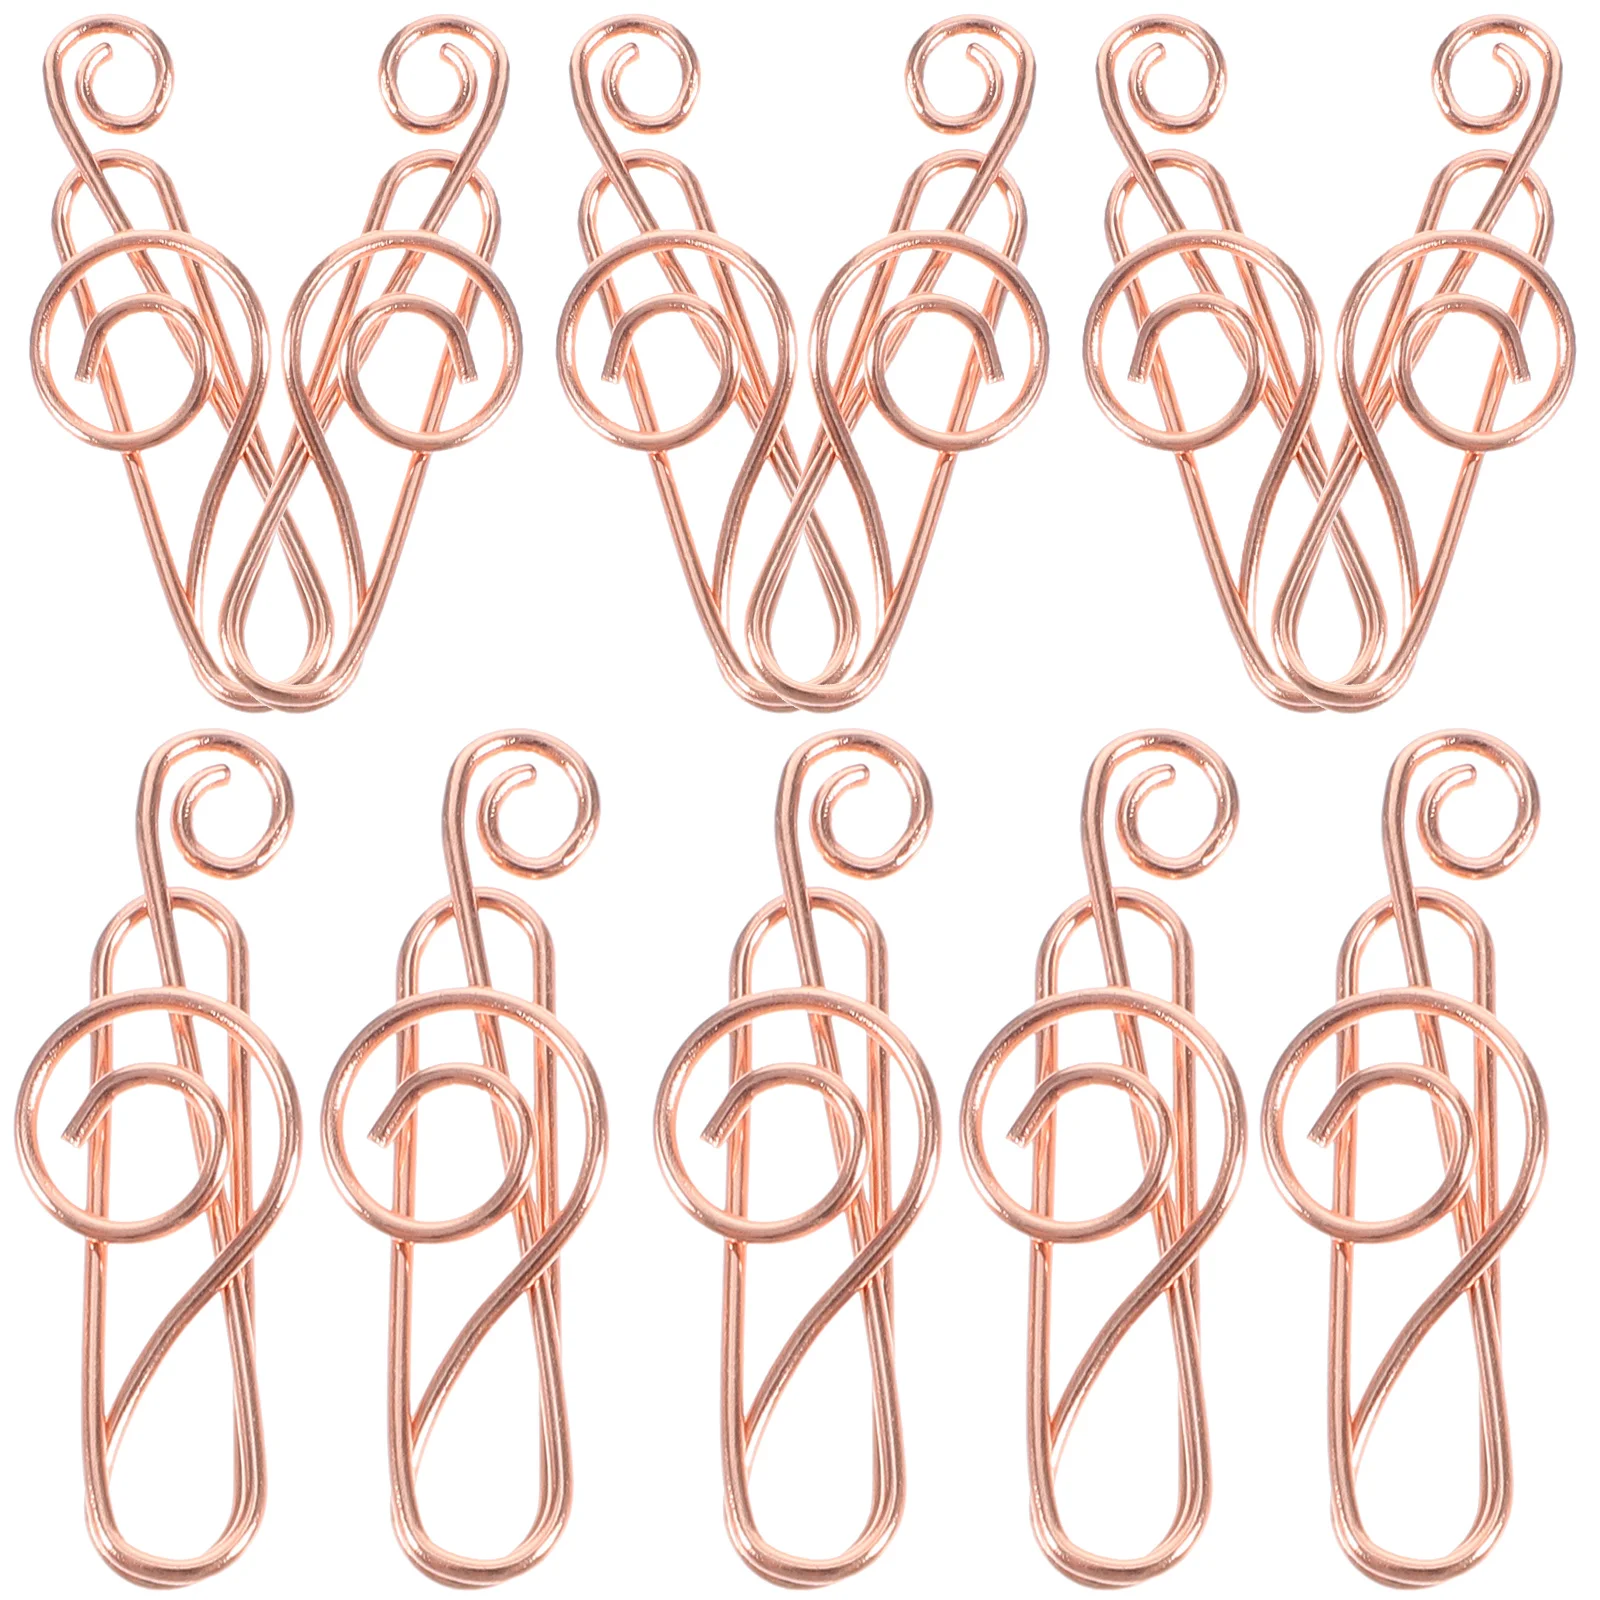 

50pcs Decorative Music Note Shaped Document Clips Sturdy Metal Clip Office Supply